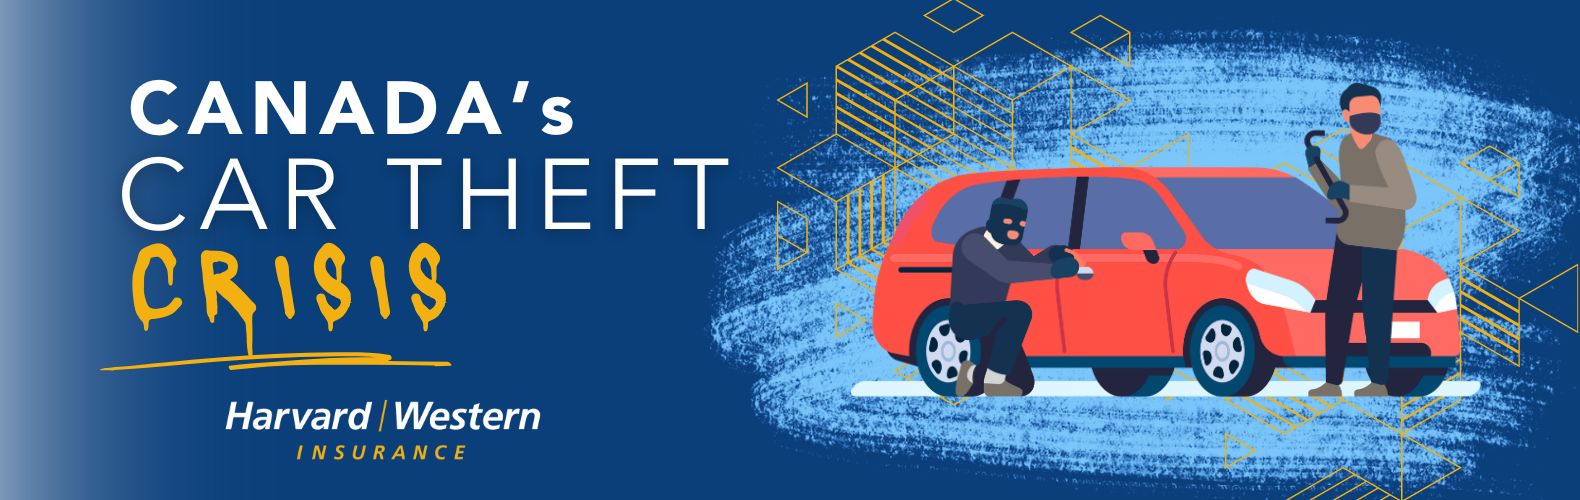 car theft crisis Canada on navy background with red car of car theft illustration